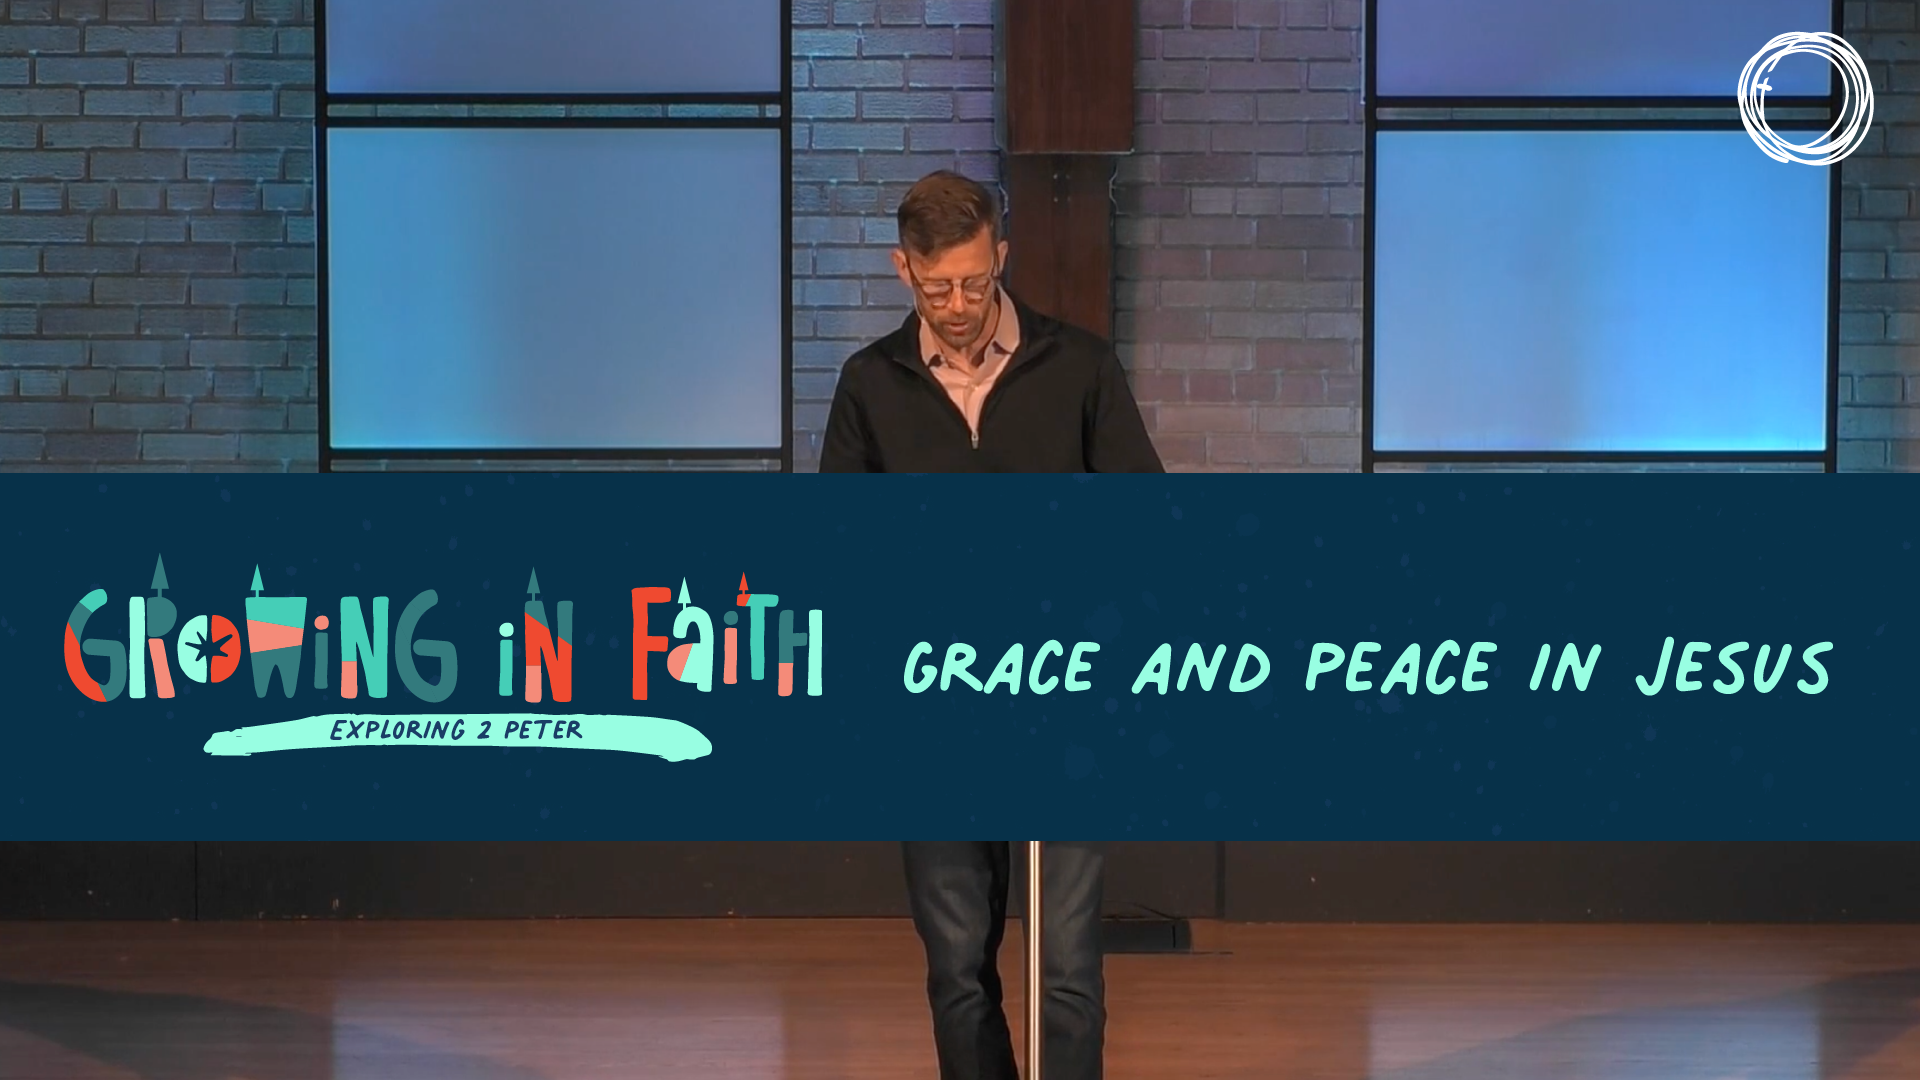 Grace and Peace in Jesus